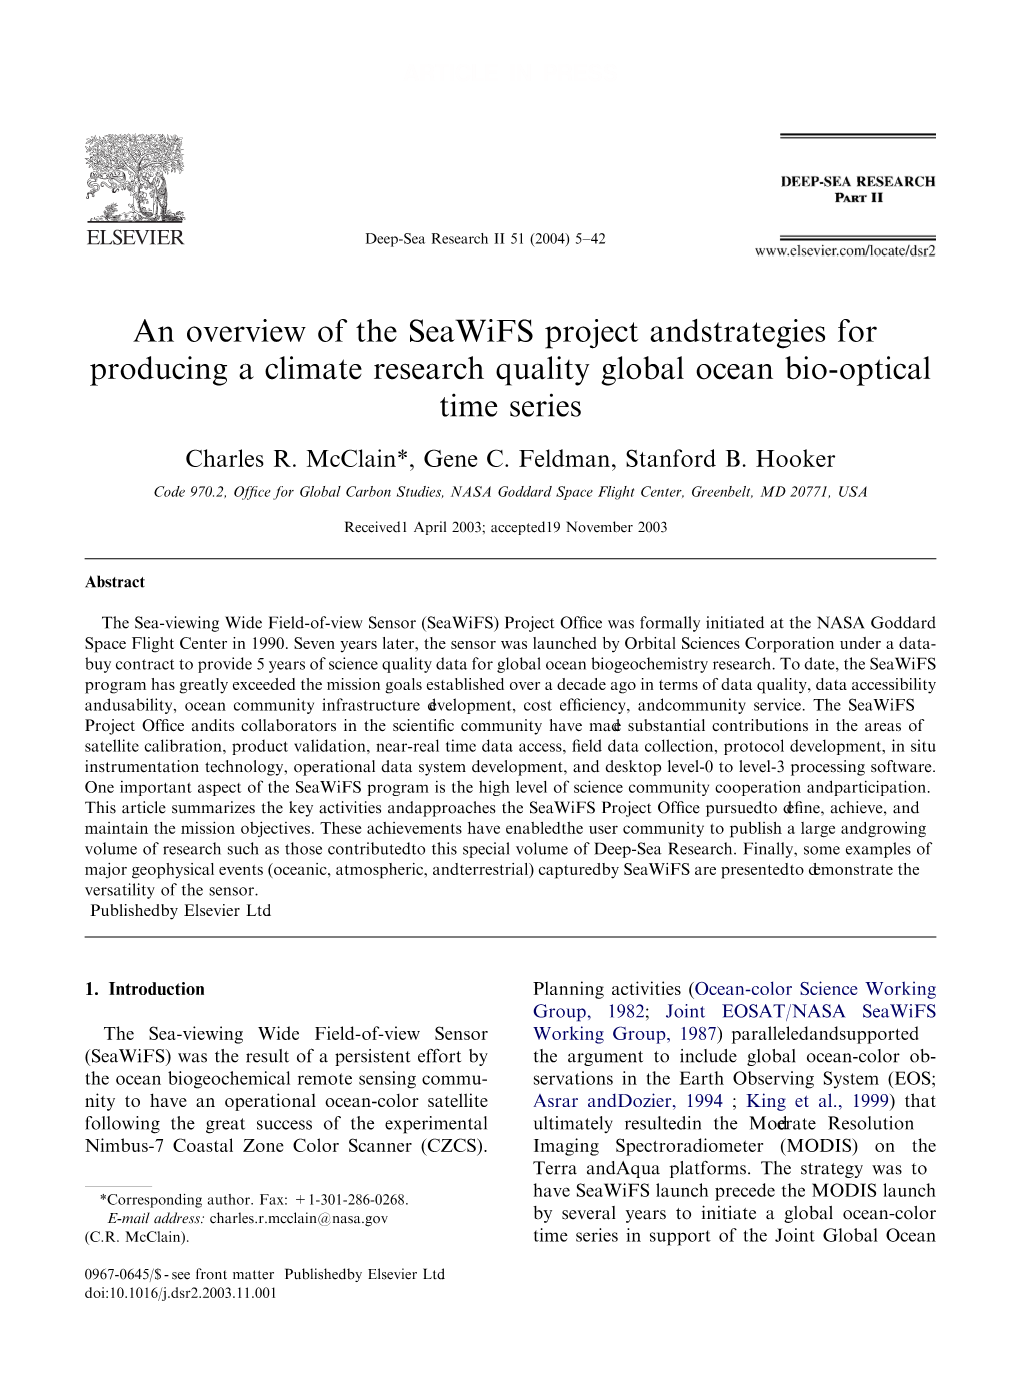 An Overview of the Seawifs Project and Strategies for Producing a Climate Research Quality Global Ocean Bio-Optical Time Series